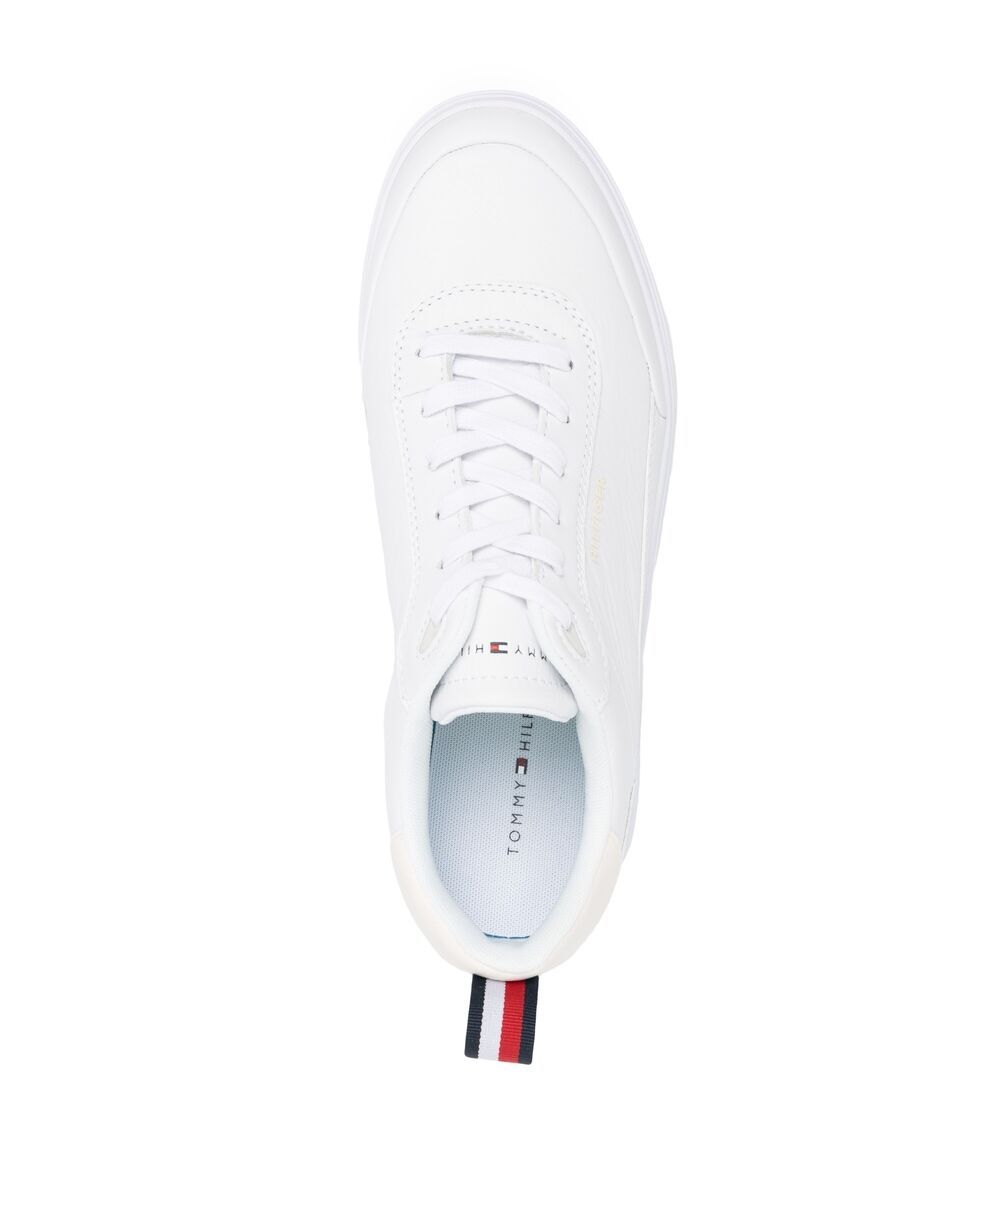 Shop Tommy Hilfiger low-top sneakers with Express Delivery - FARFETCH